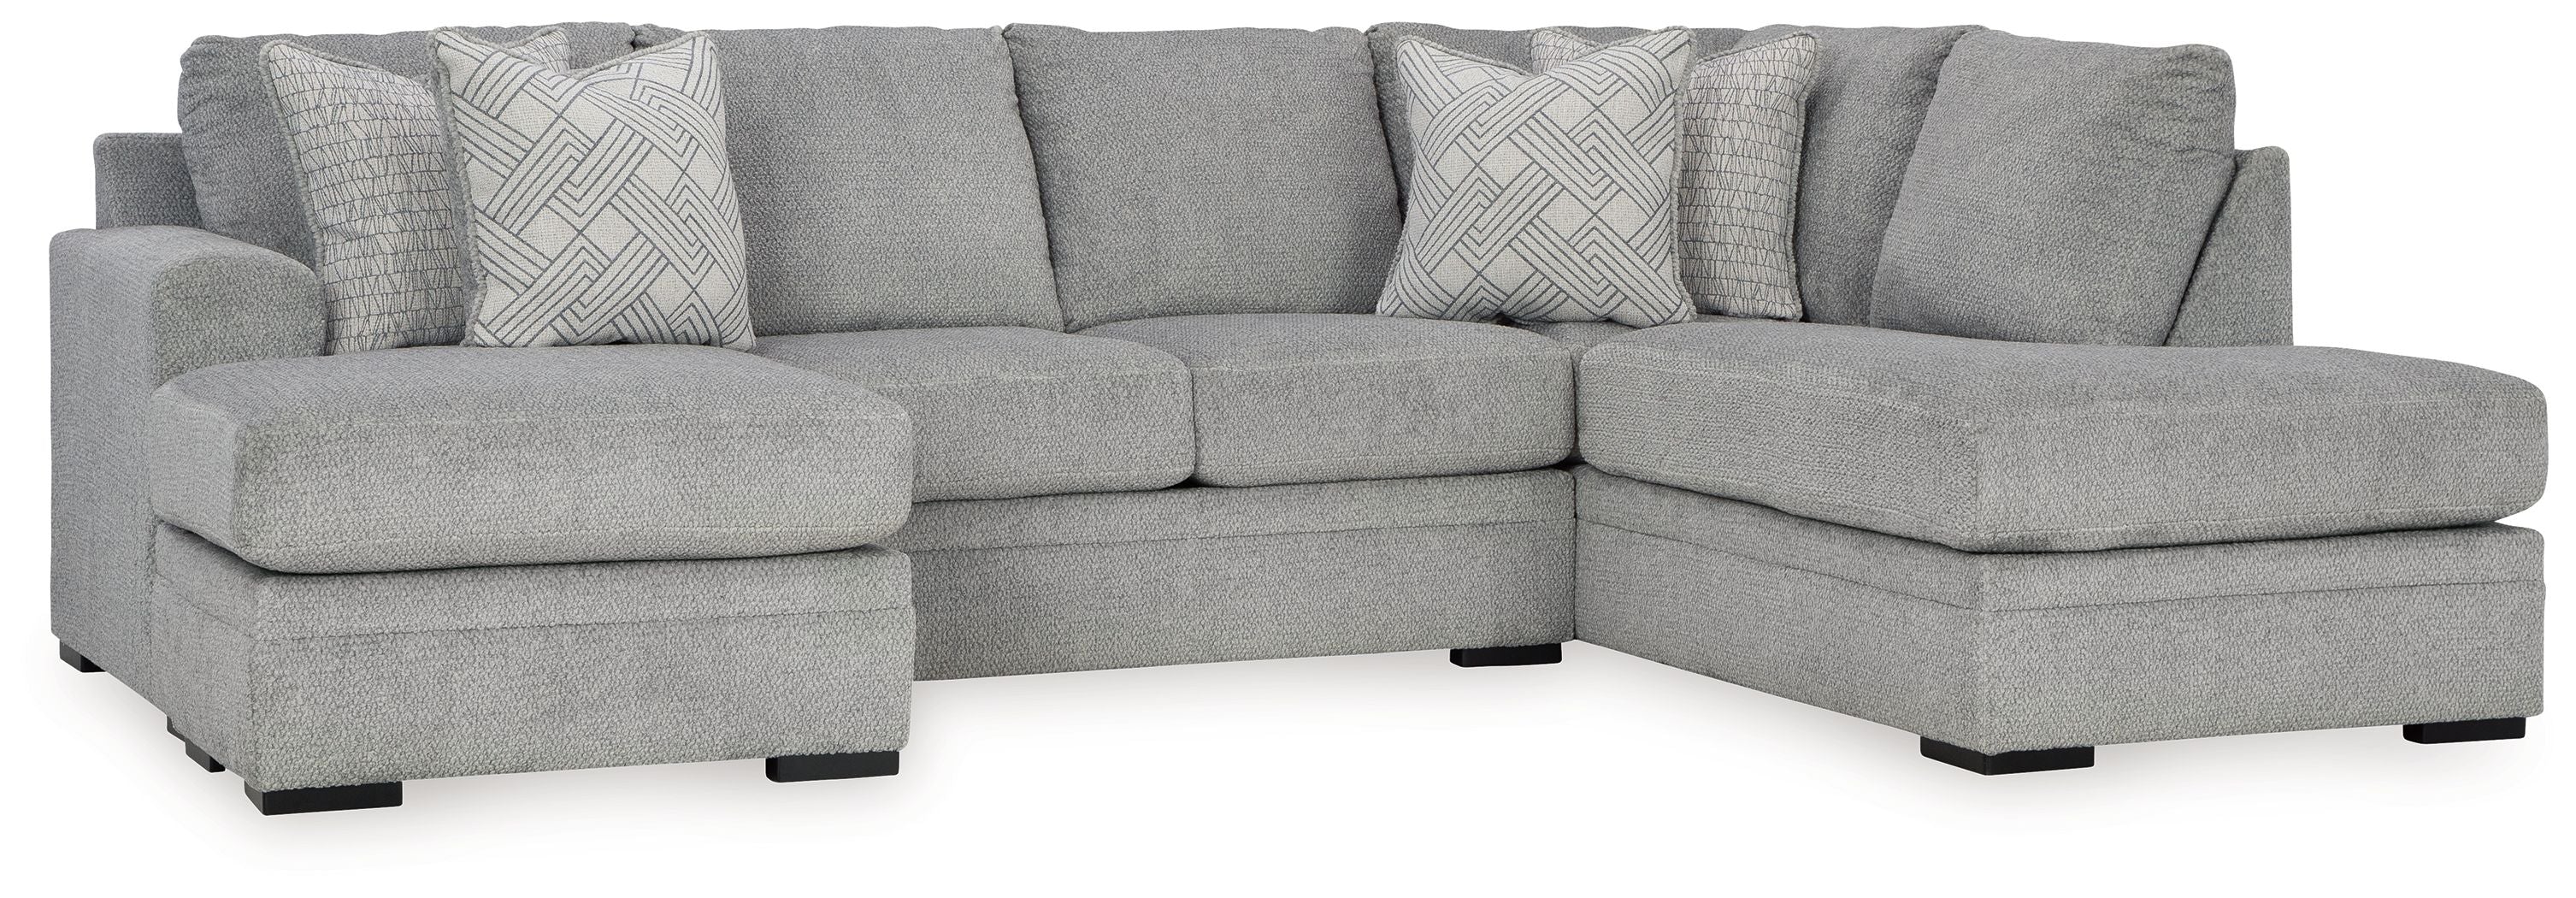 Ashley Casselbury Sectional w/ Chaise - Gray-Stationary Sectionals-American Furniture Outlet